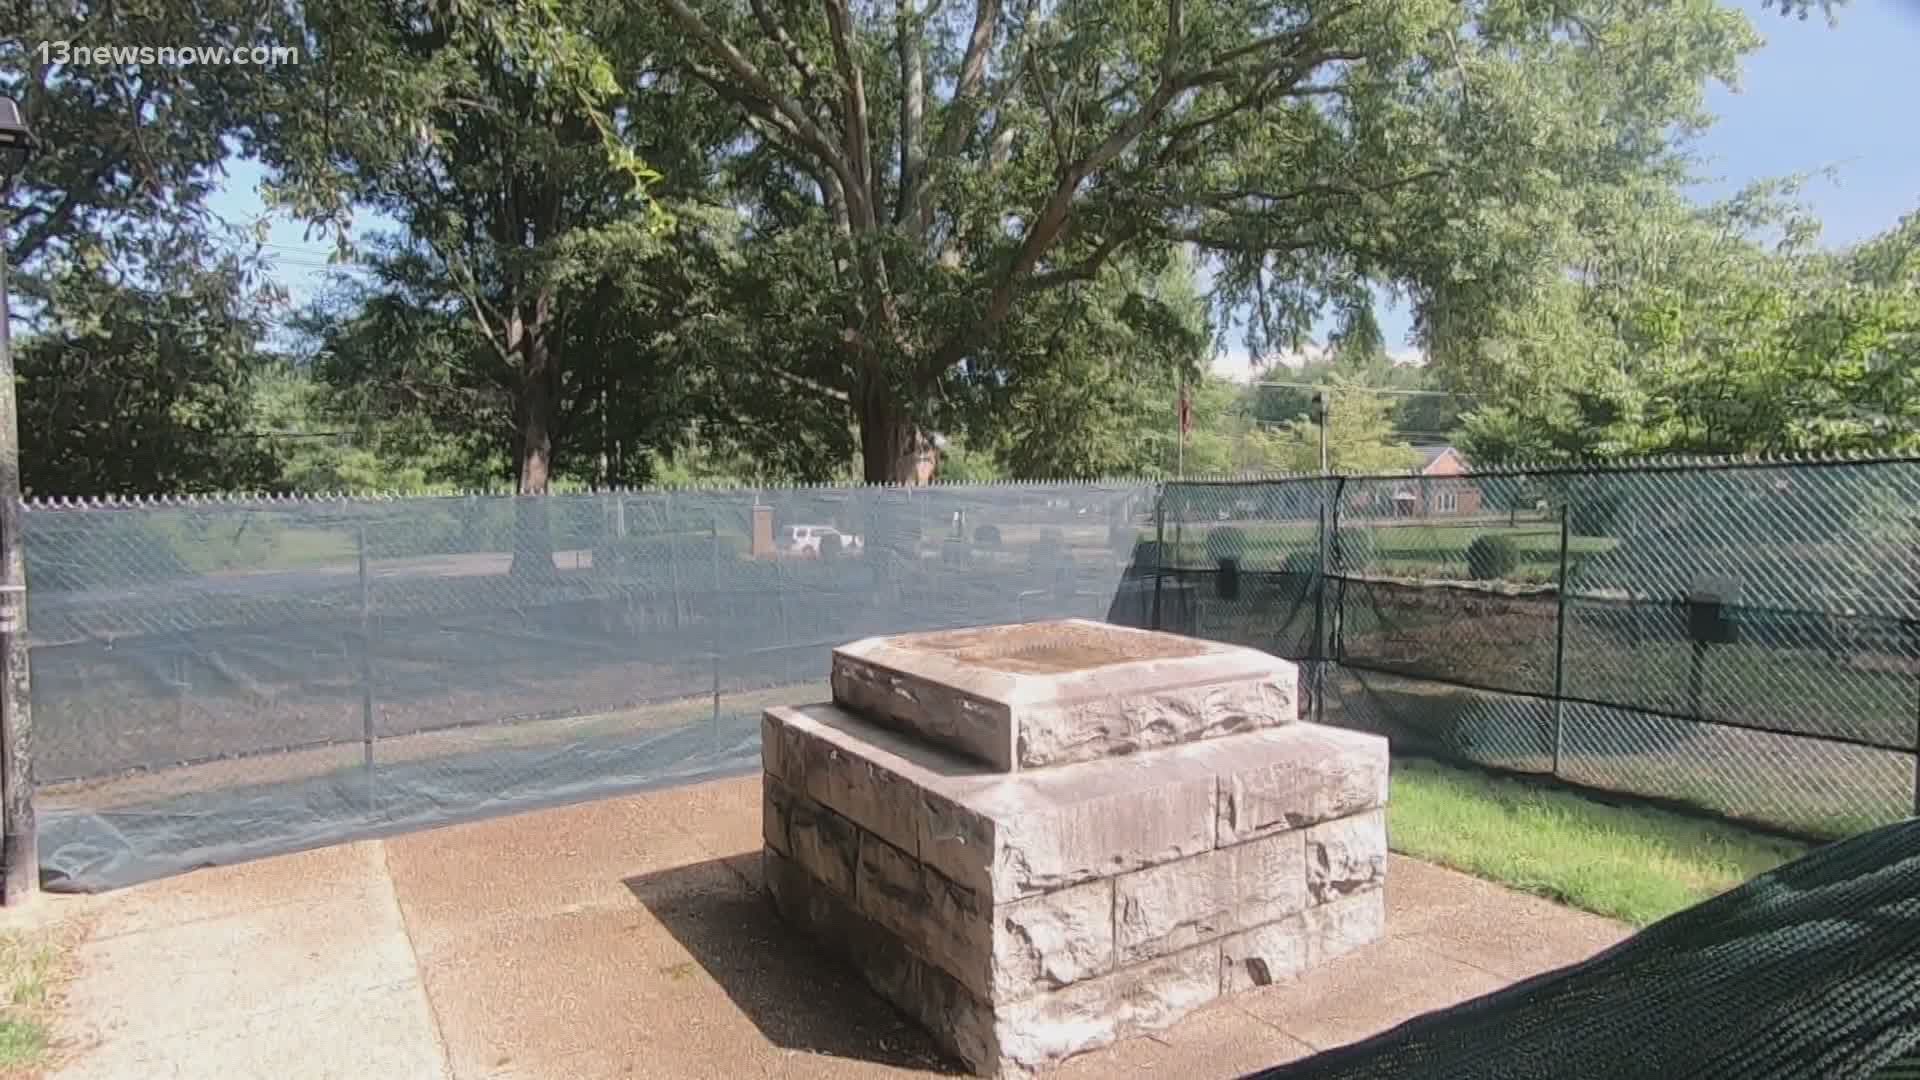 The Virginia Beach City Council voted unanimously on Thursday to remove the monument. The statue will be kept in storage until a permanent place is found.